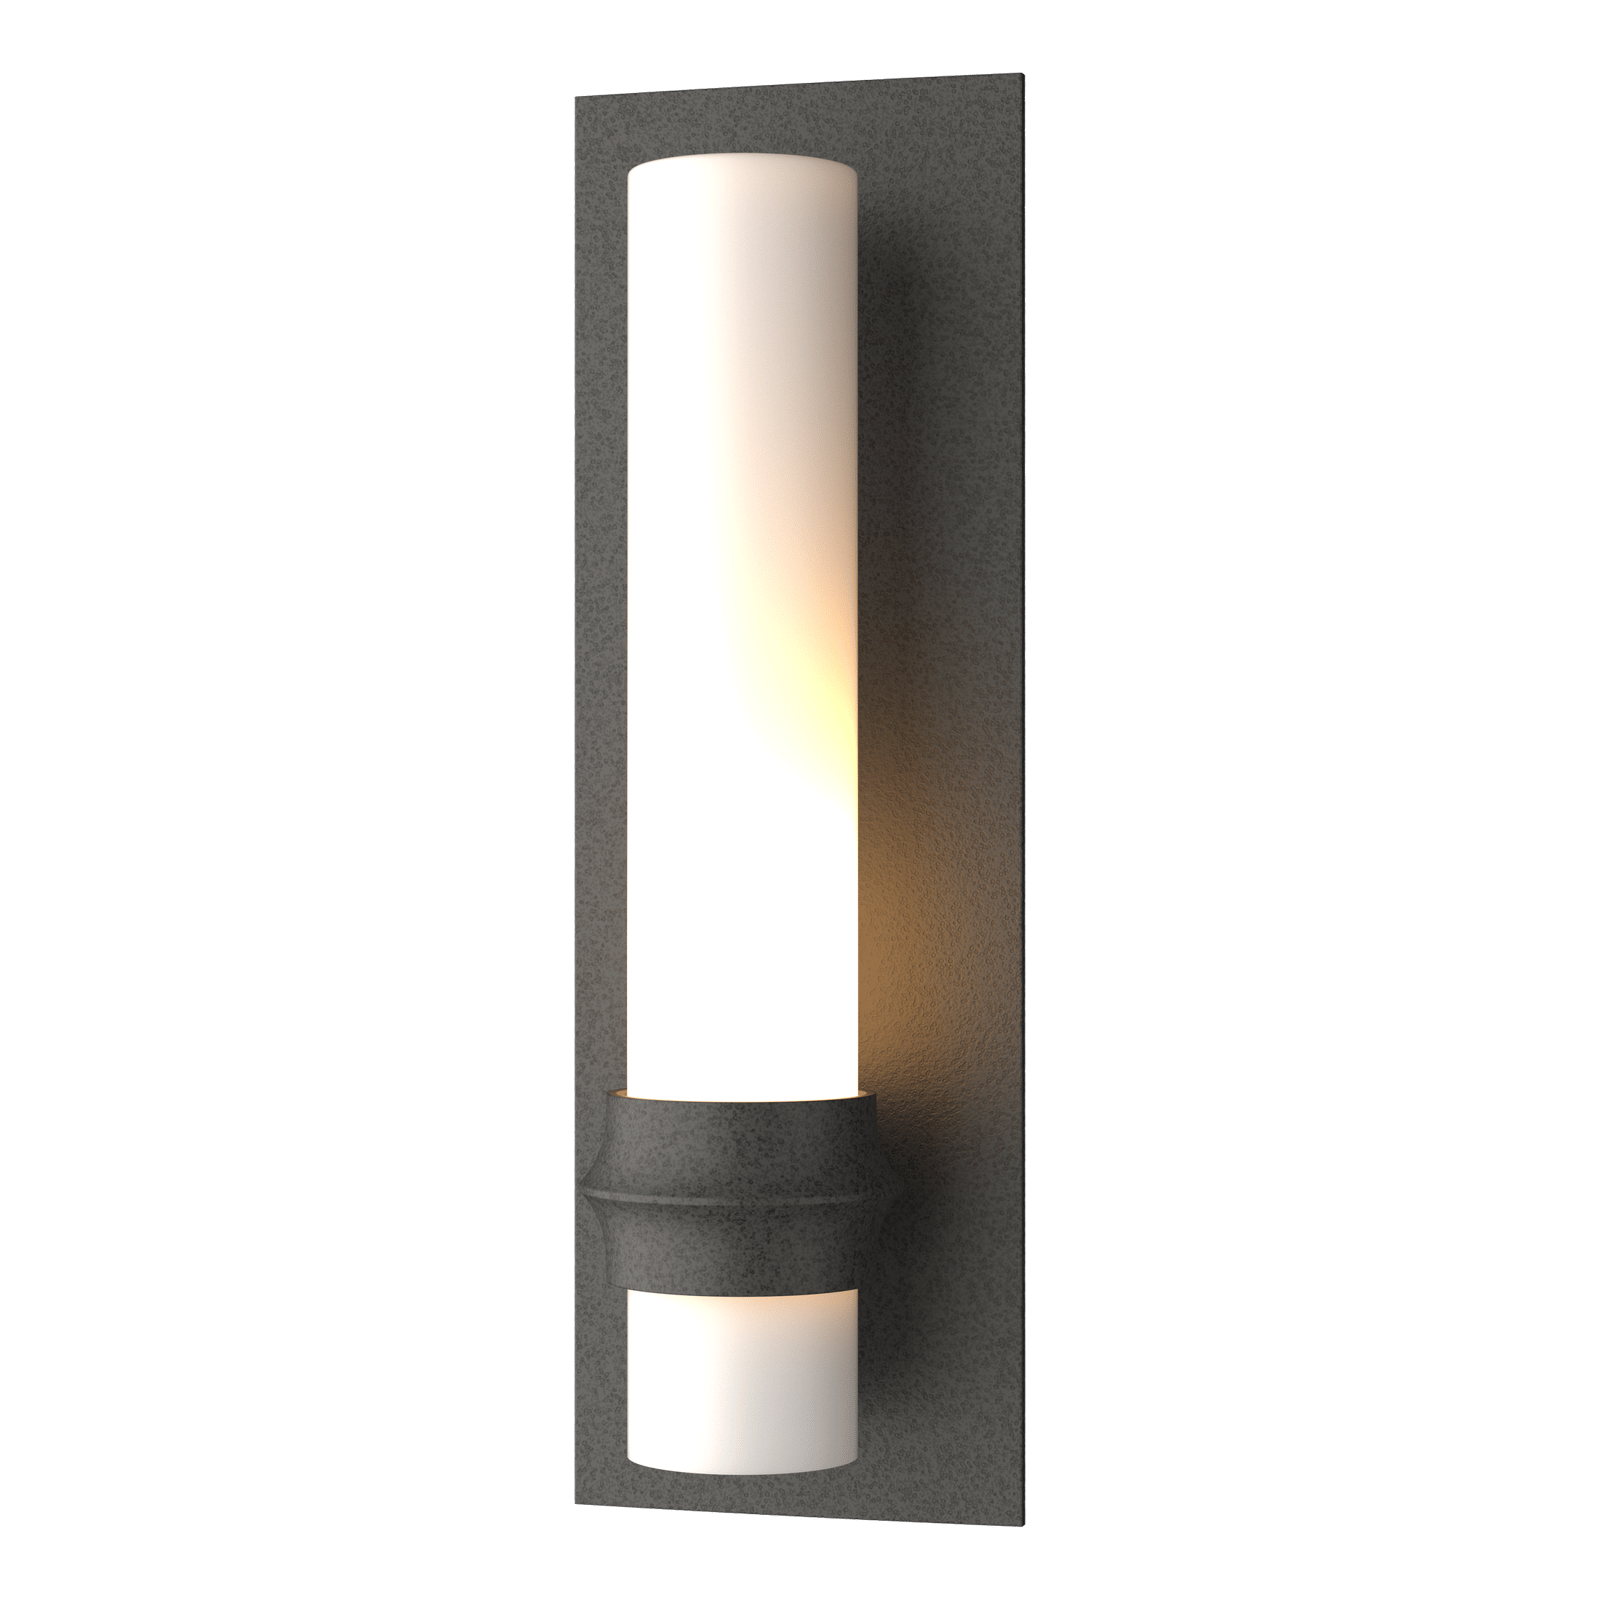 Hubbardton Forge Rook Small Outdoor Sconce Outdoor l Wall Hubbardton Forge Coastal Natural Iron  